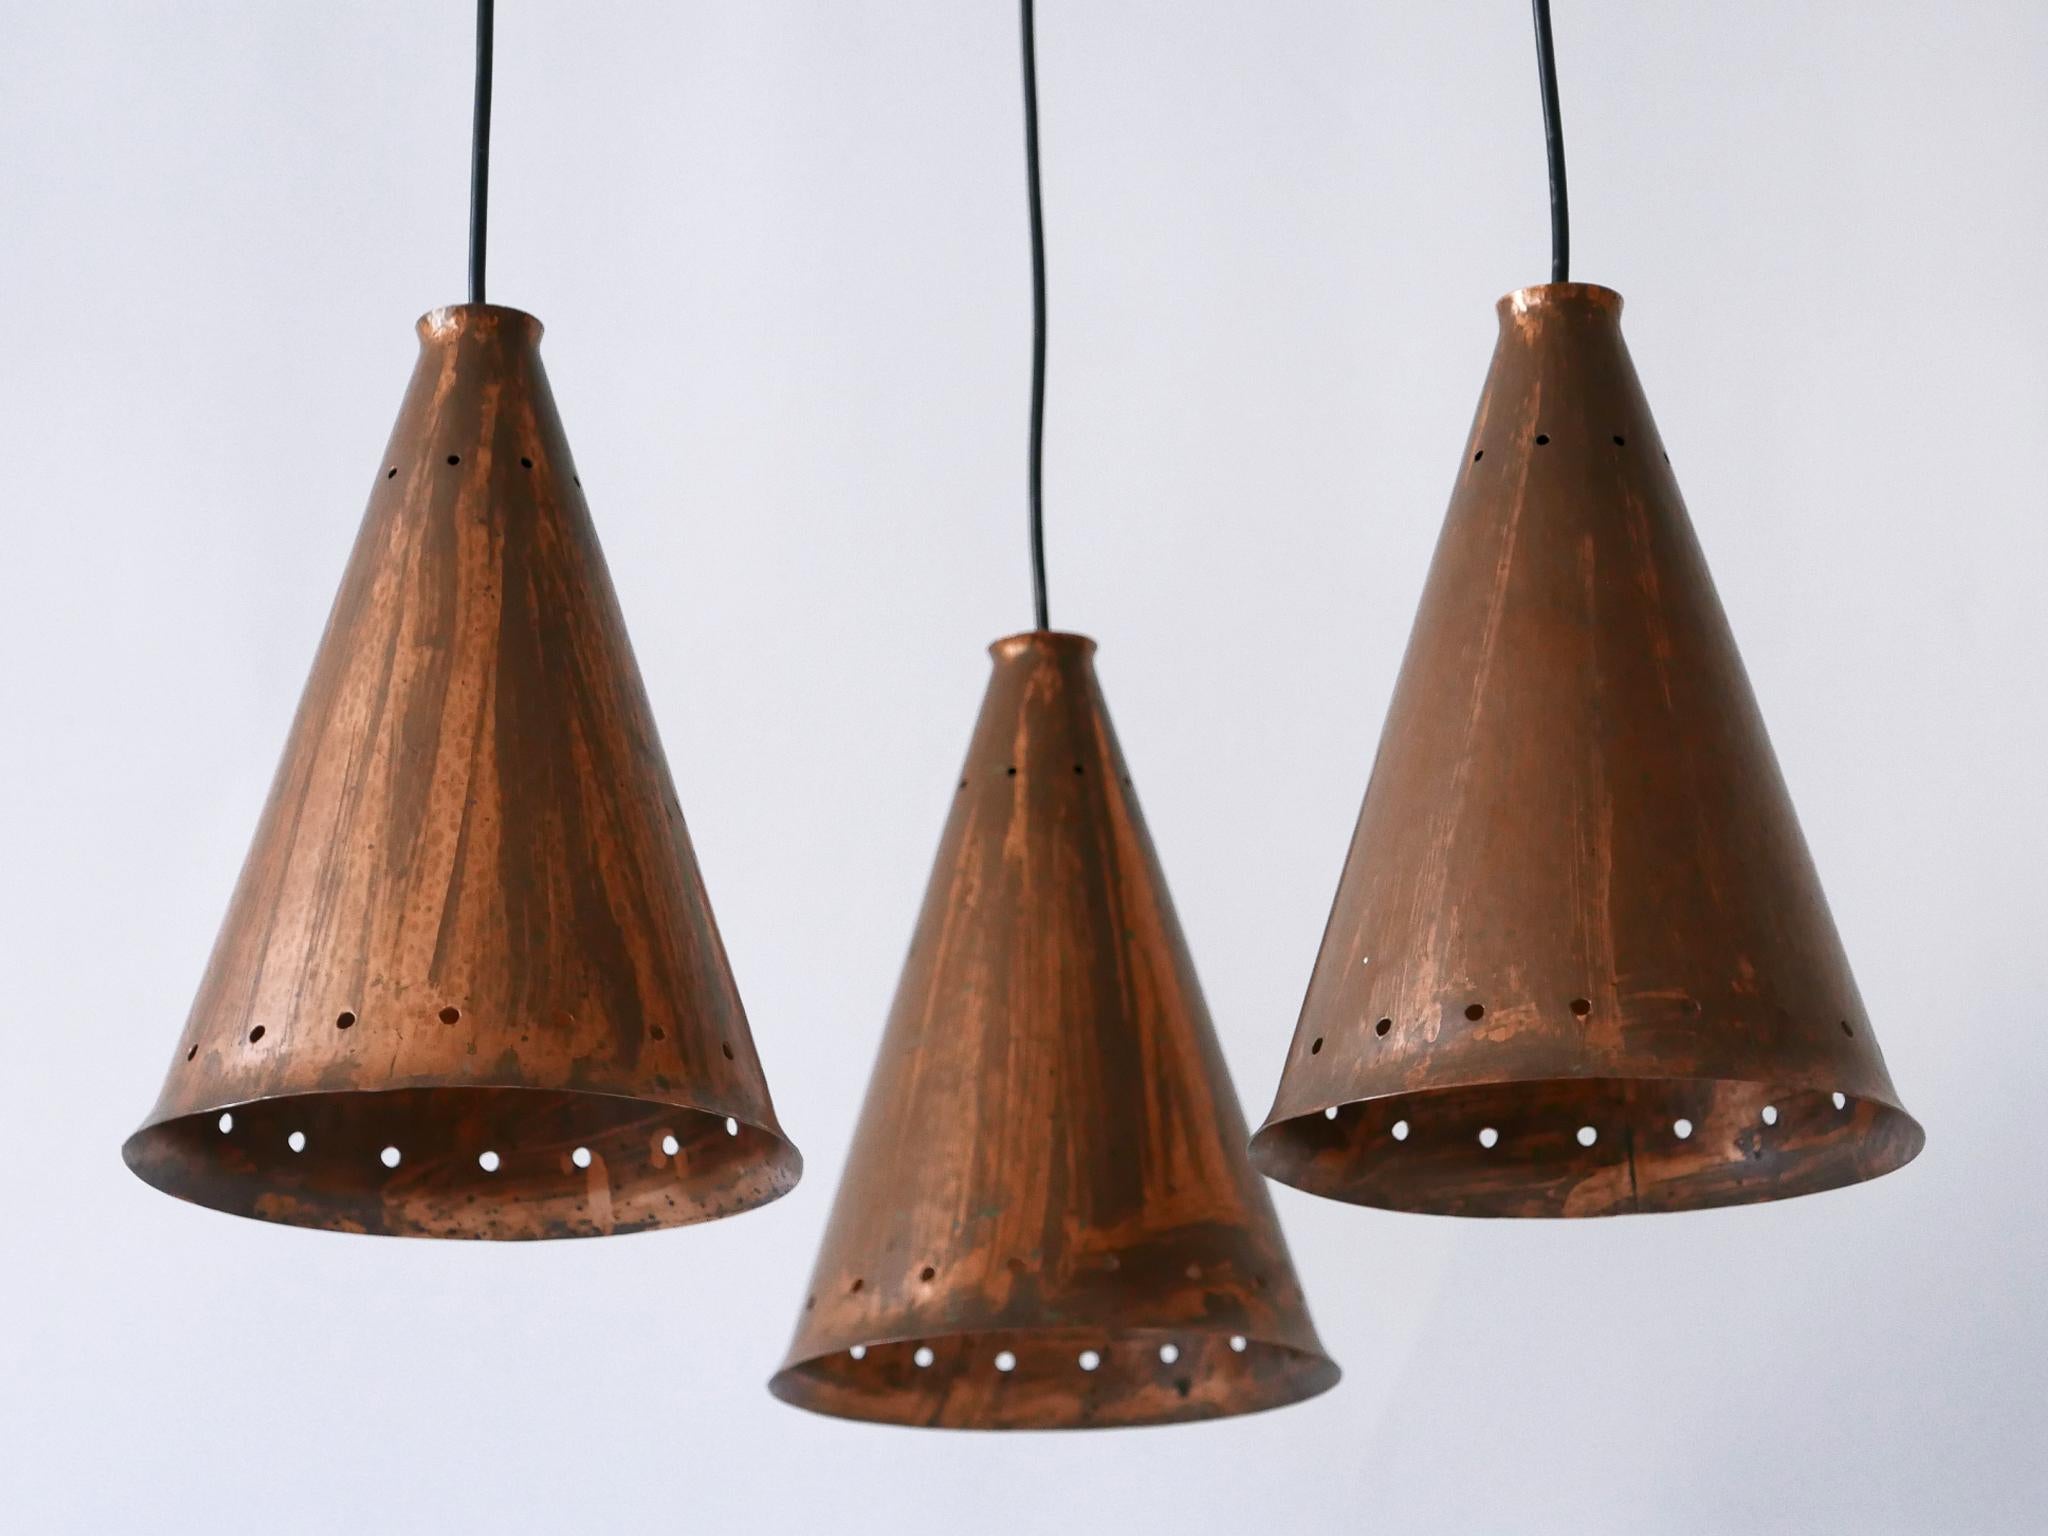 Exceptional & Large Mid-Century Modern Copper Pendant Lamp Scandinavia, 1950s For Sale 6